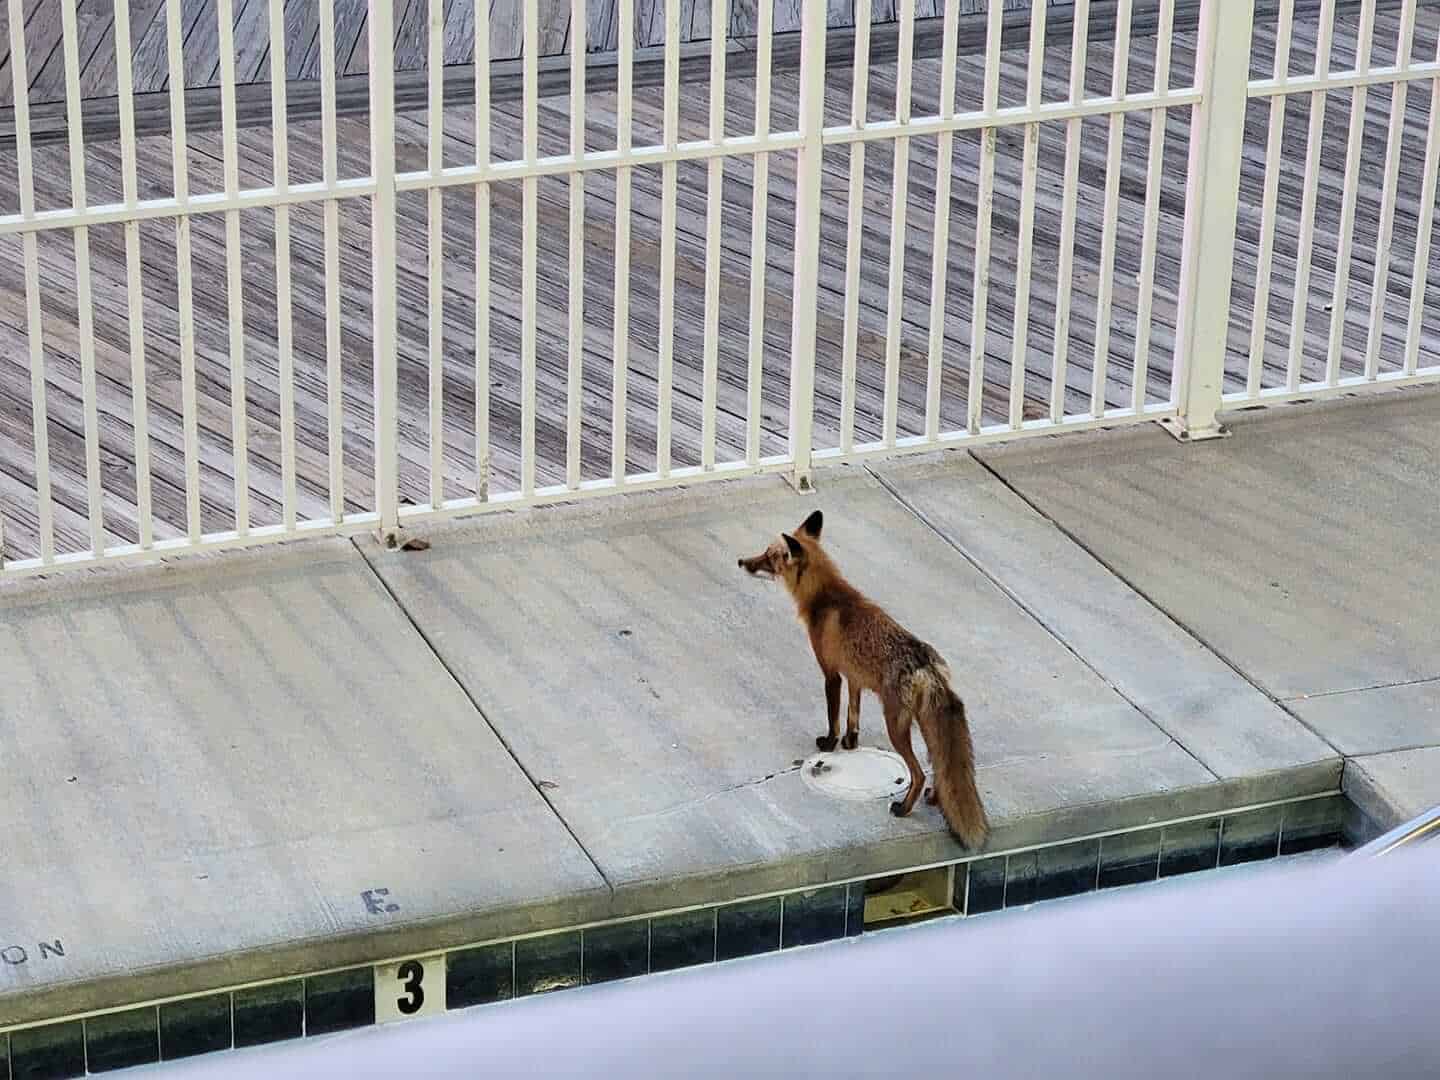 Creature Feature Red fox sightings abound on Ocean City beach pic